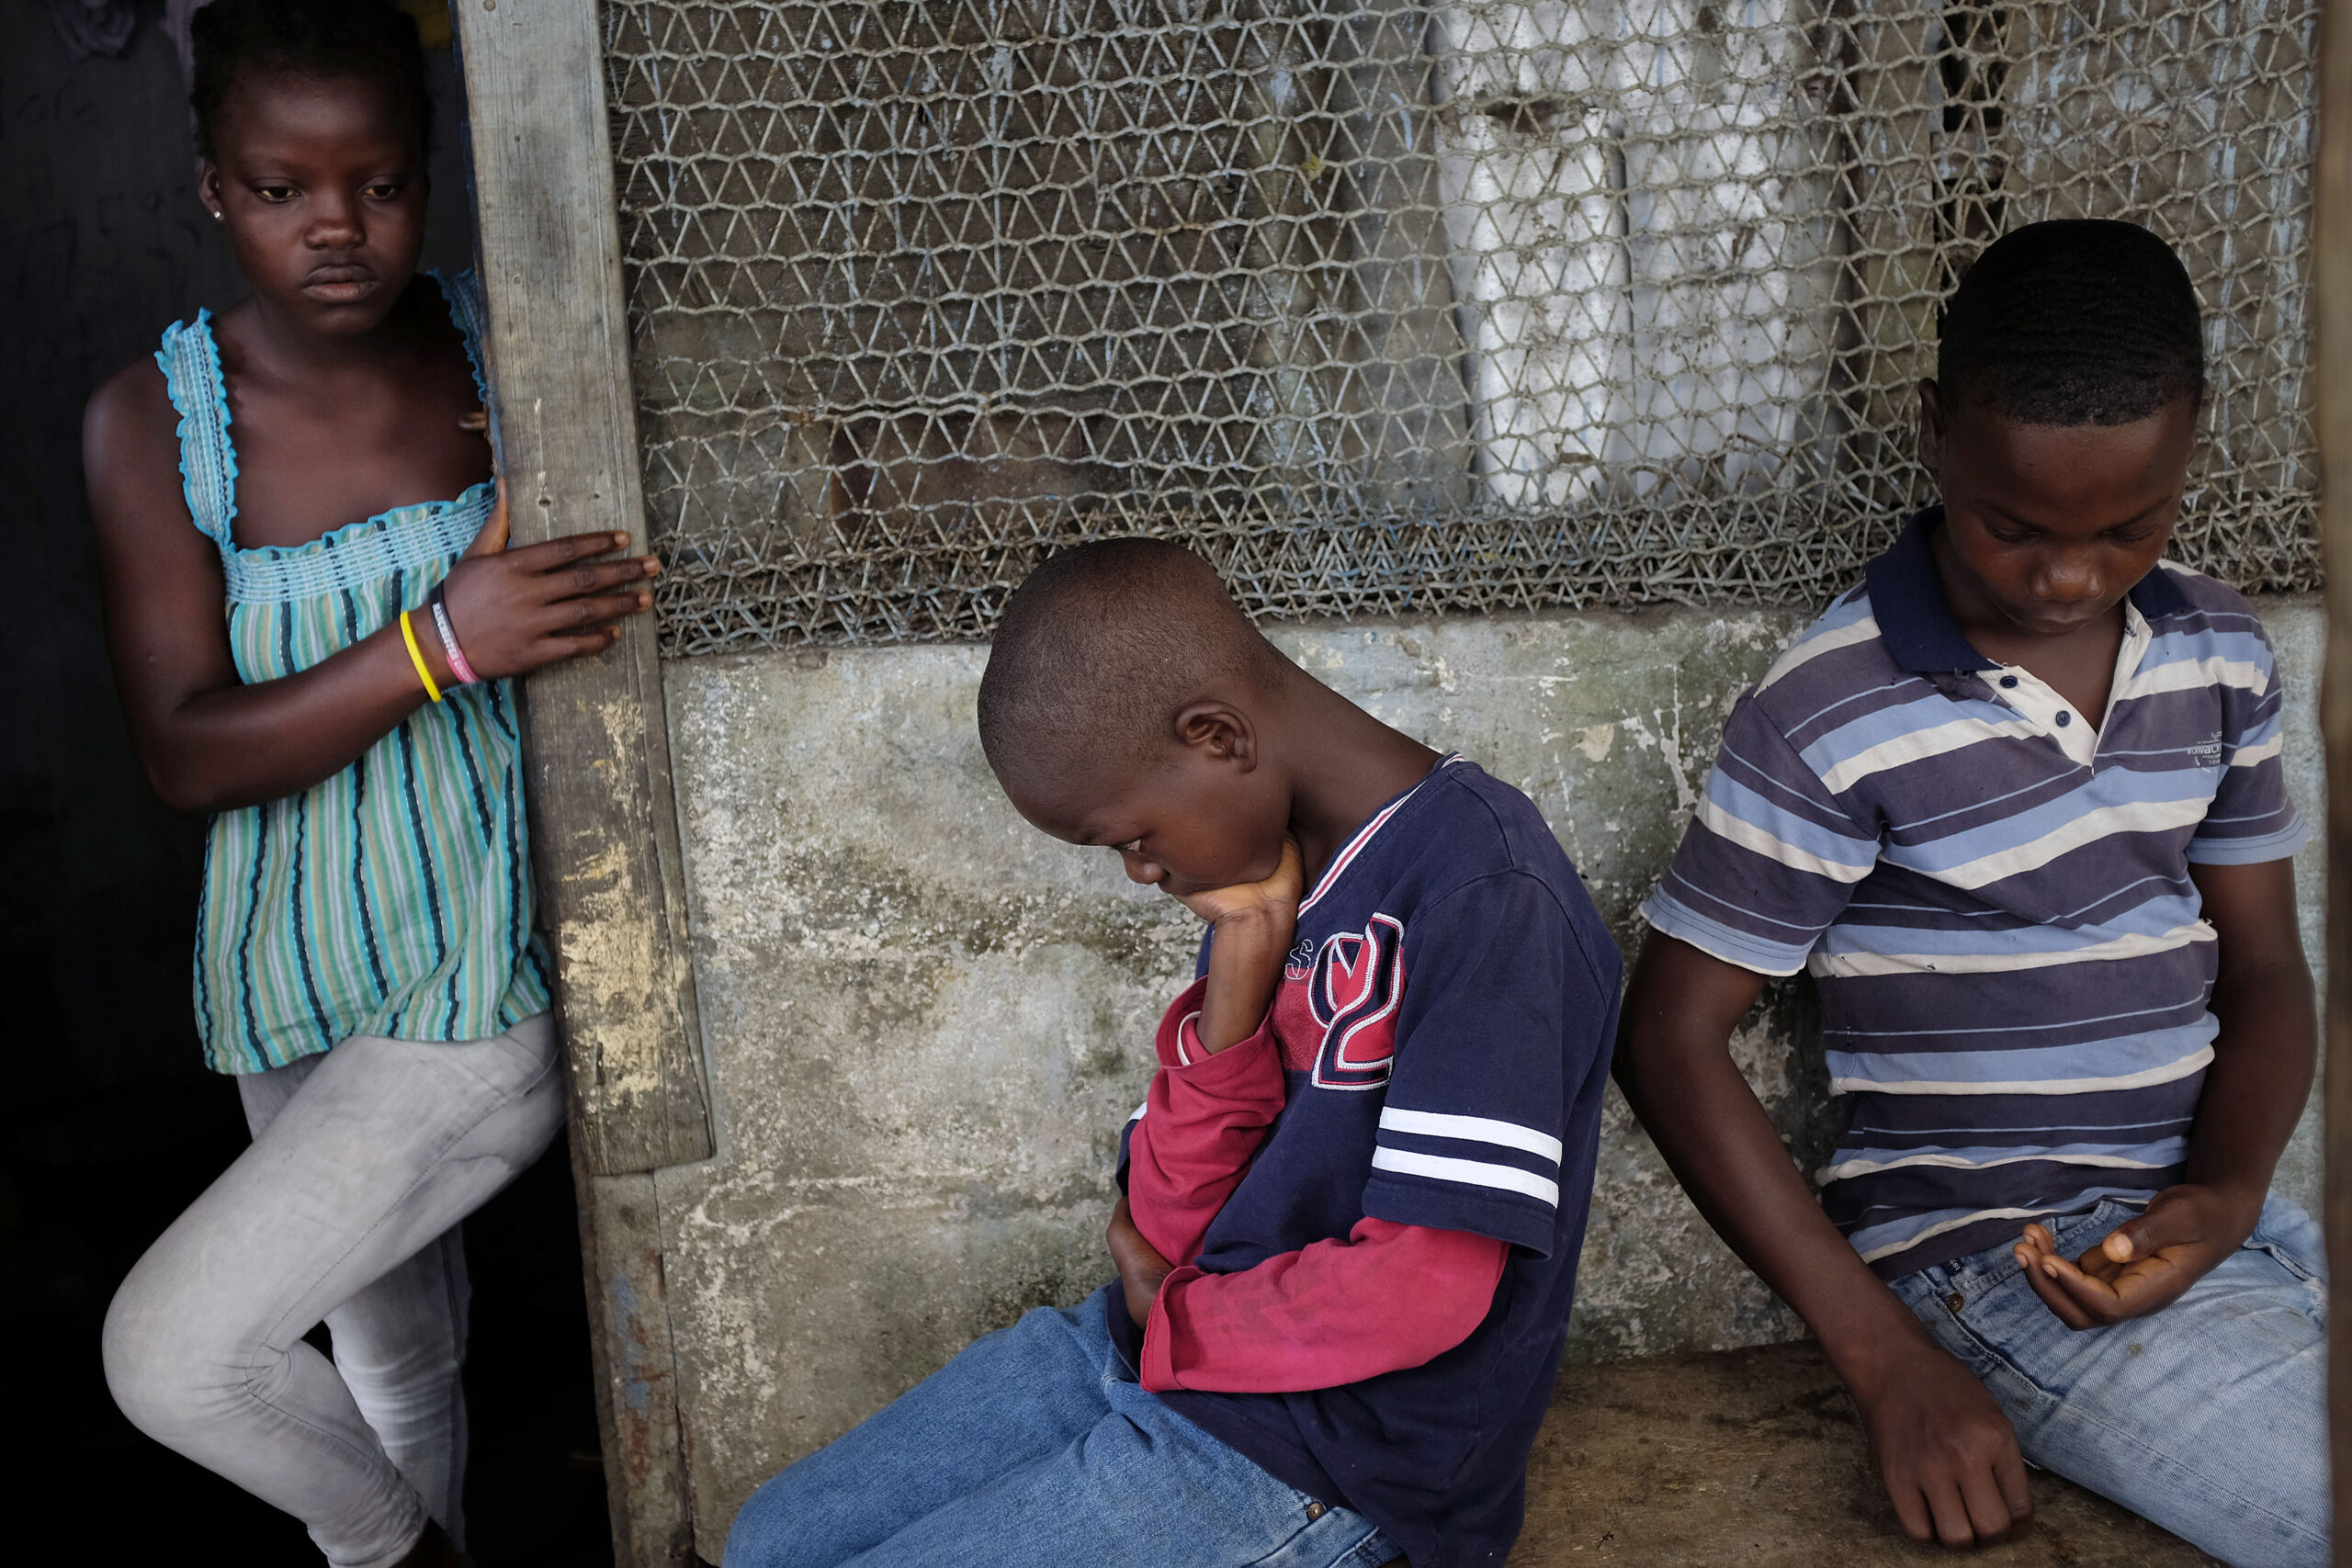 In this photo taken Sunday Sept. 28, 2014, Promise, 16, Emmanuel Junior, 11, and Benson, 15, Cooper sit at their St. Paul Bridge home in Monrovia, Liberia. The Cooper children are now orphans, having lost their mother, Princess, in July, and their father Emmanuel in August to Ebola. Their 5-month-old baby brother, Success, also succumbed to the virus in August. Ruth, their 13-year-old sister is being hospitalized with Ebola. Liberia's current crisis involving street children is partly due to the ravaging effects that Ebola had on the country nearly a decade ago. Photo credit: Jerome Delay, the Associated Press.